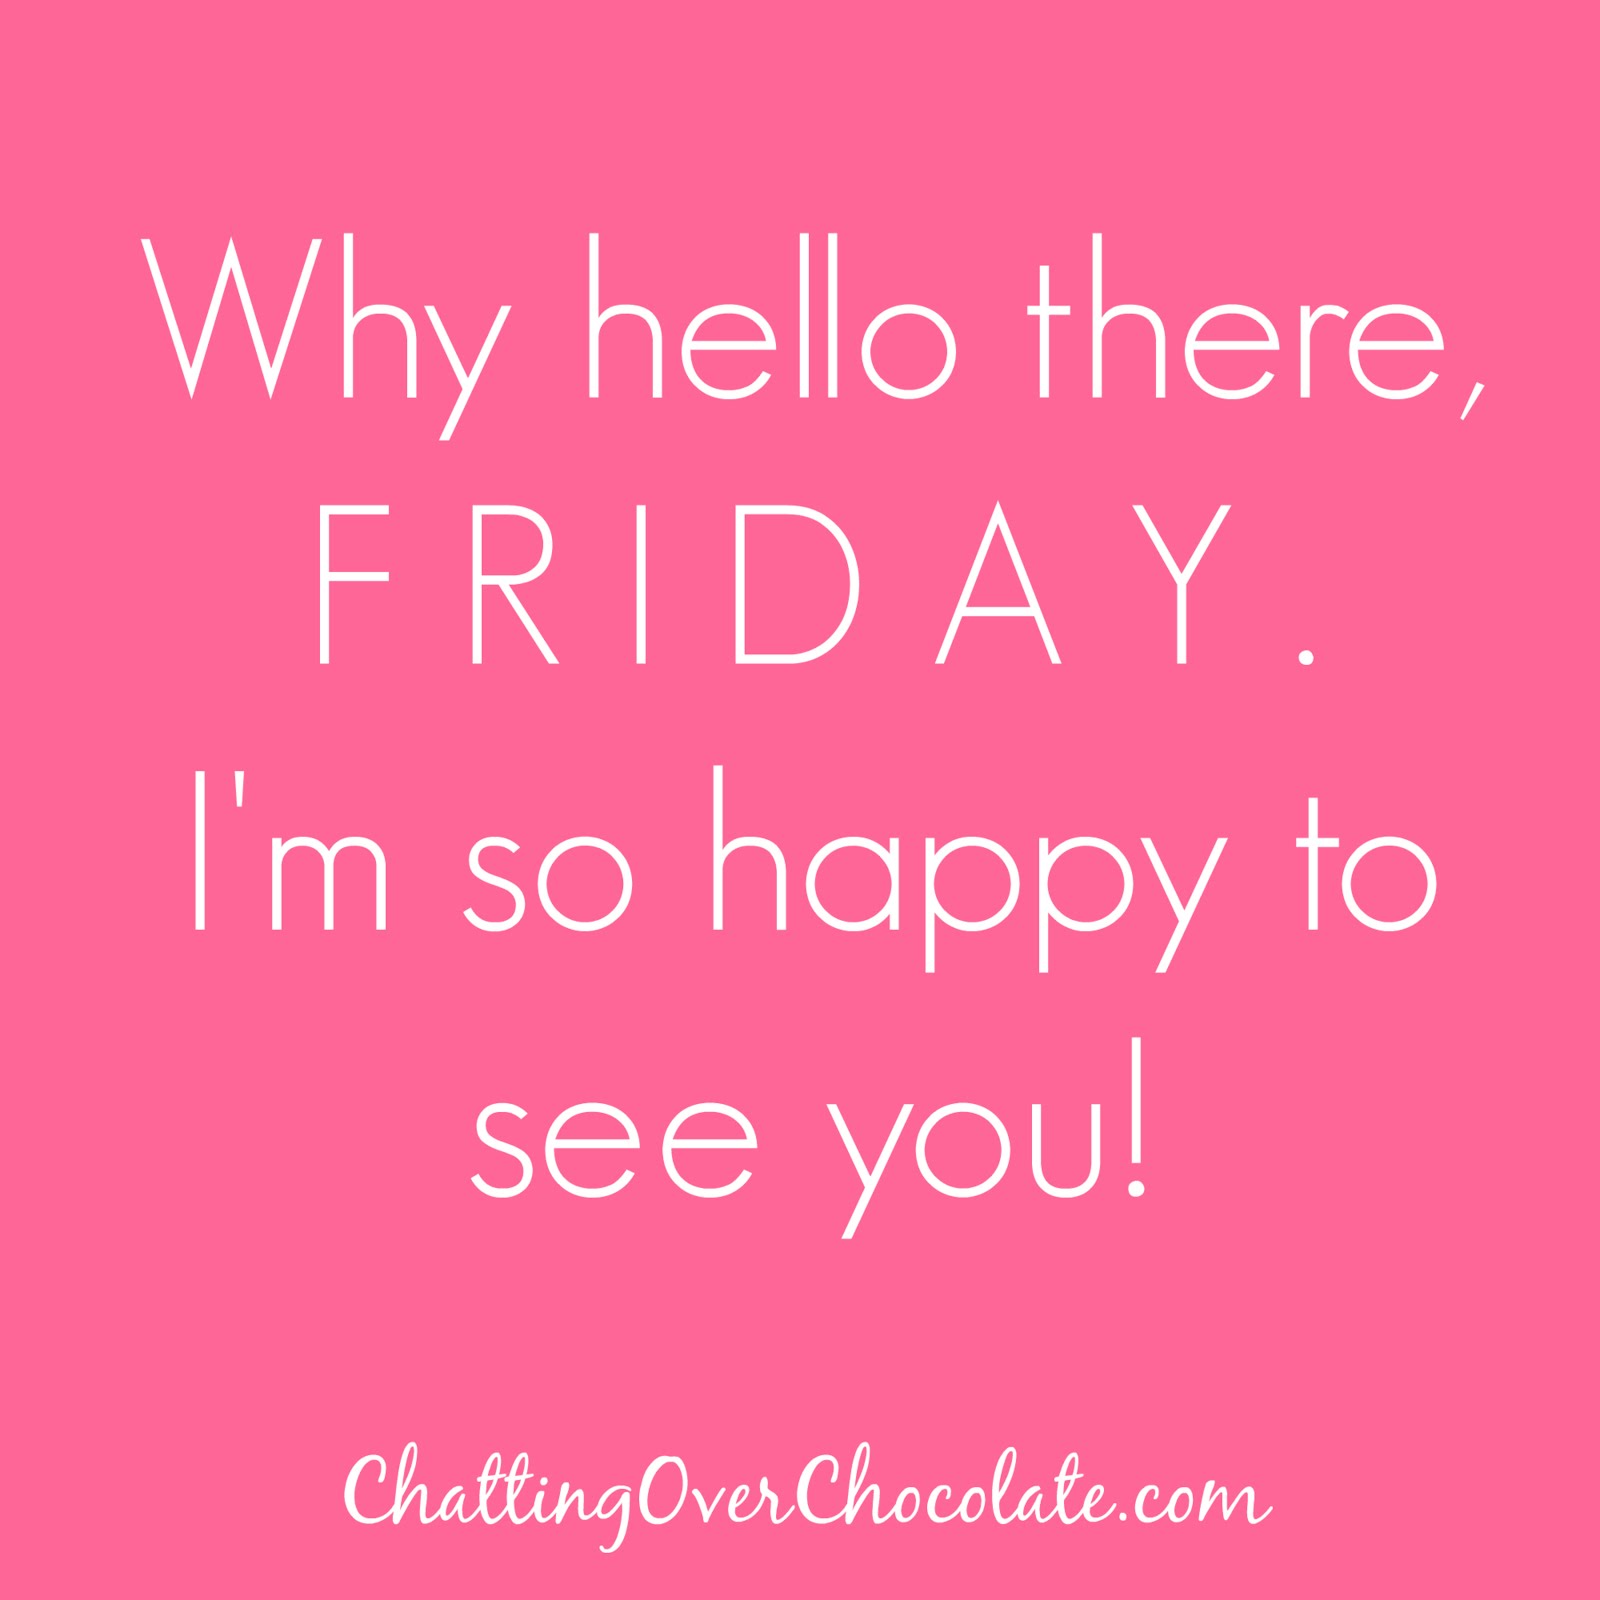 Happy Friday Friends! This week flew by and there is still so much